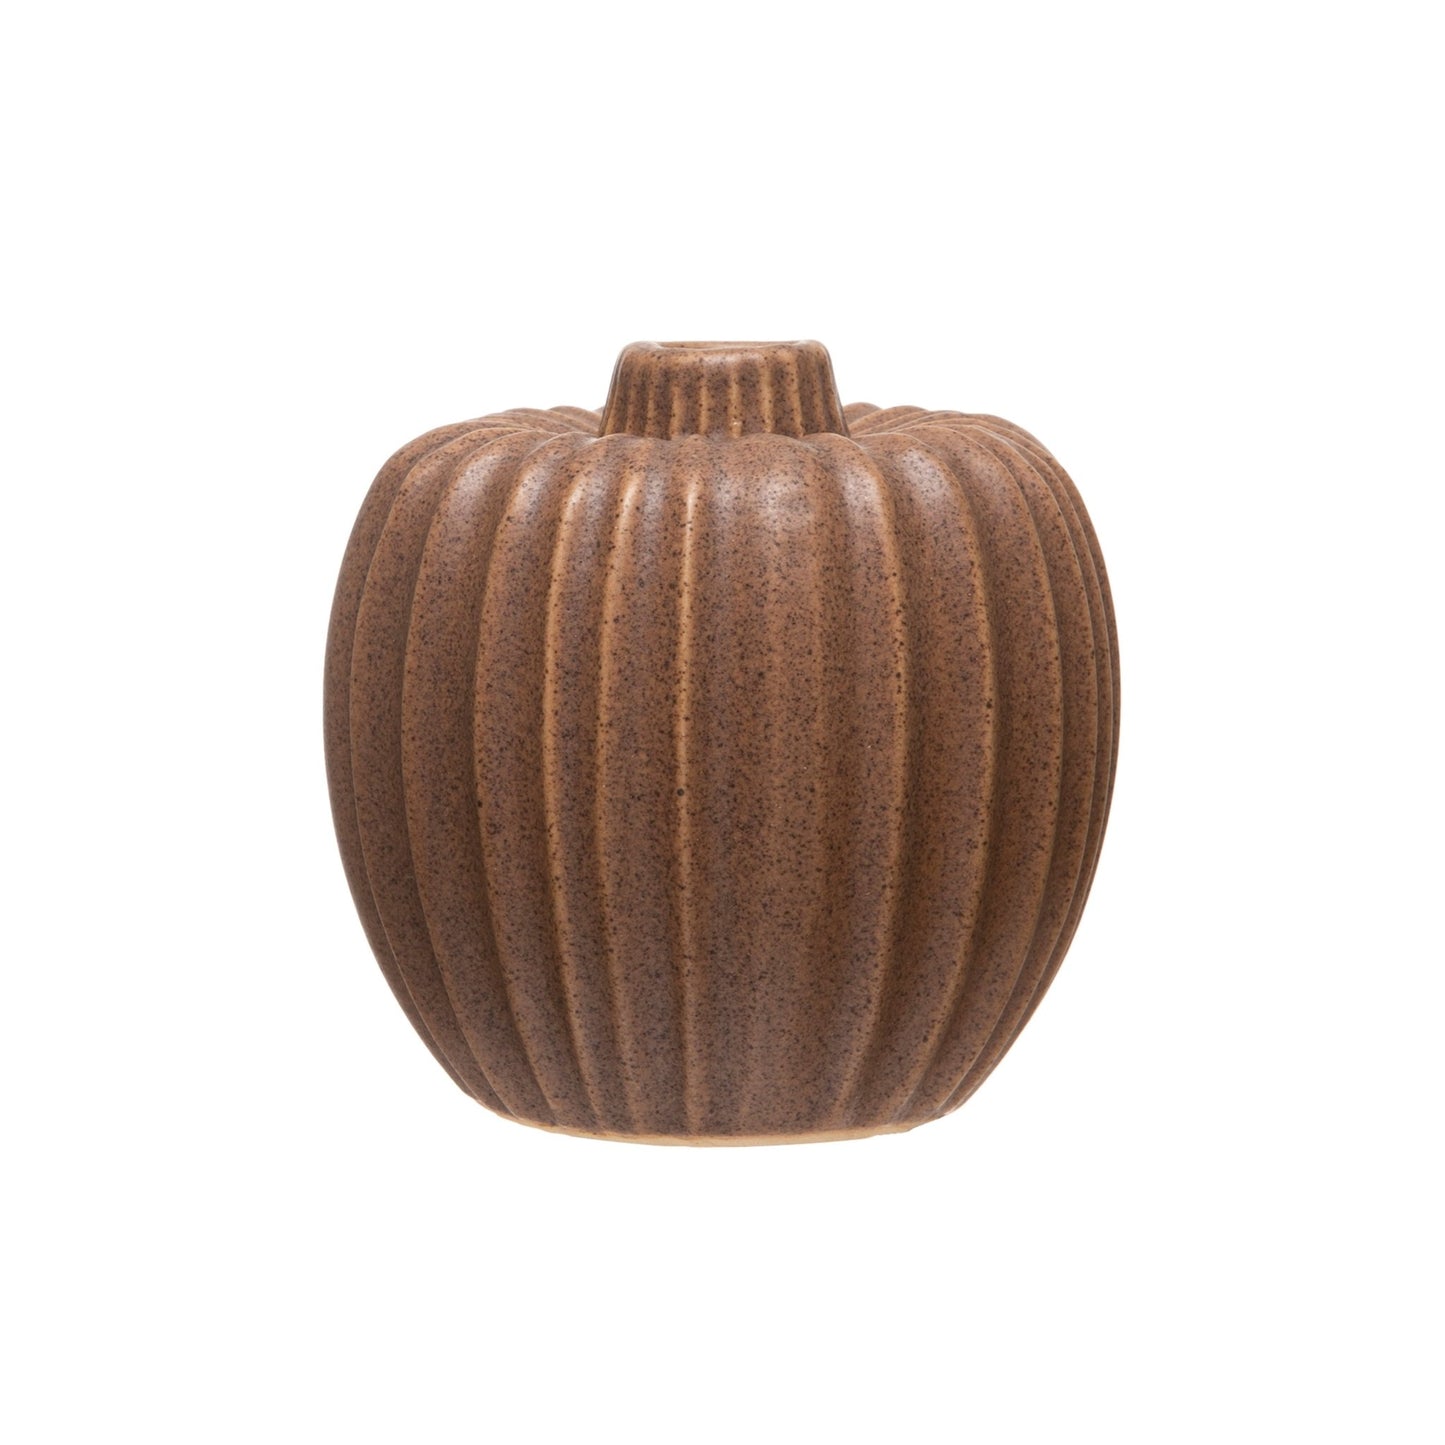 The Country Pumpkin Vase